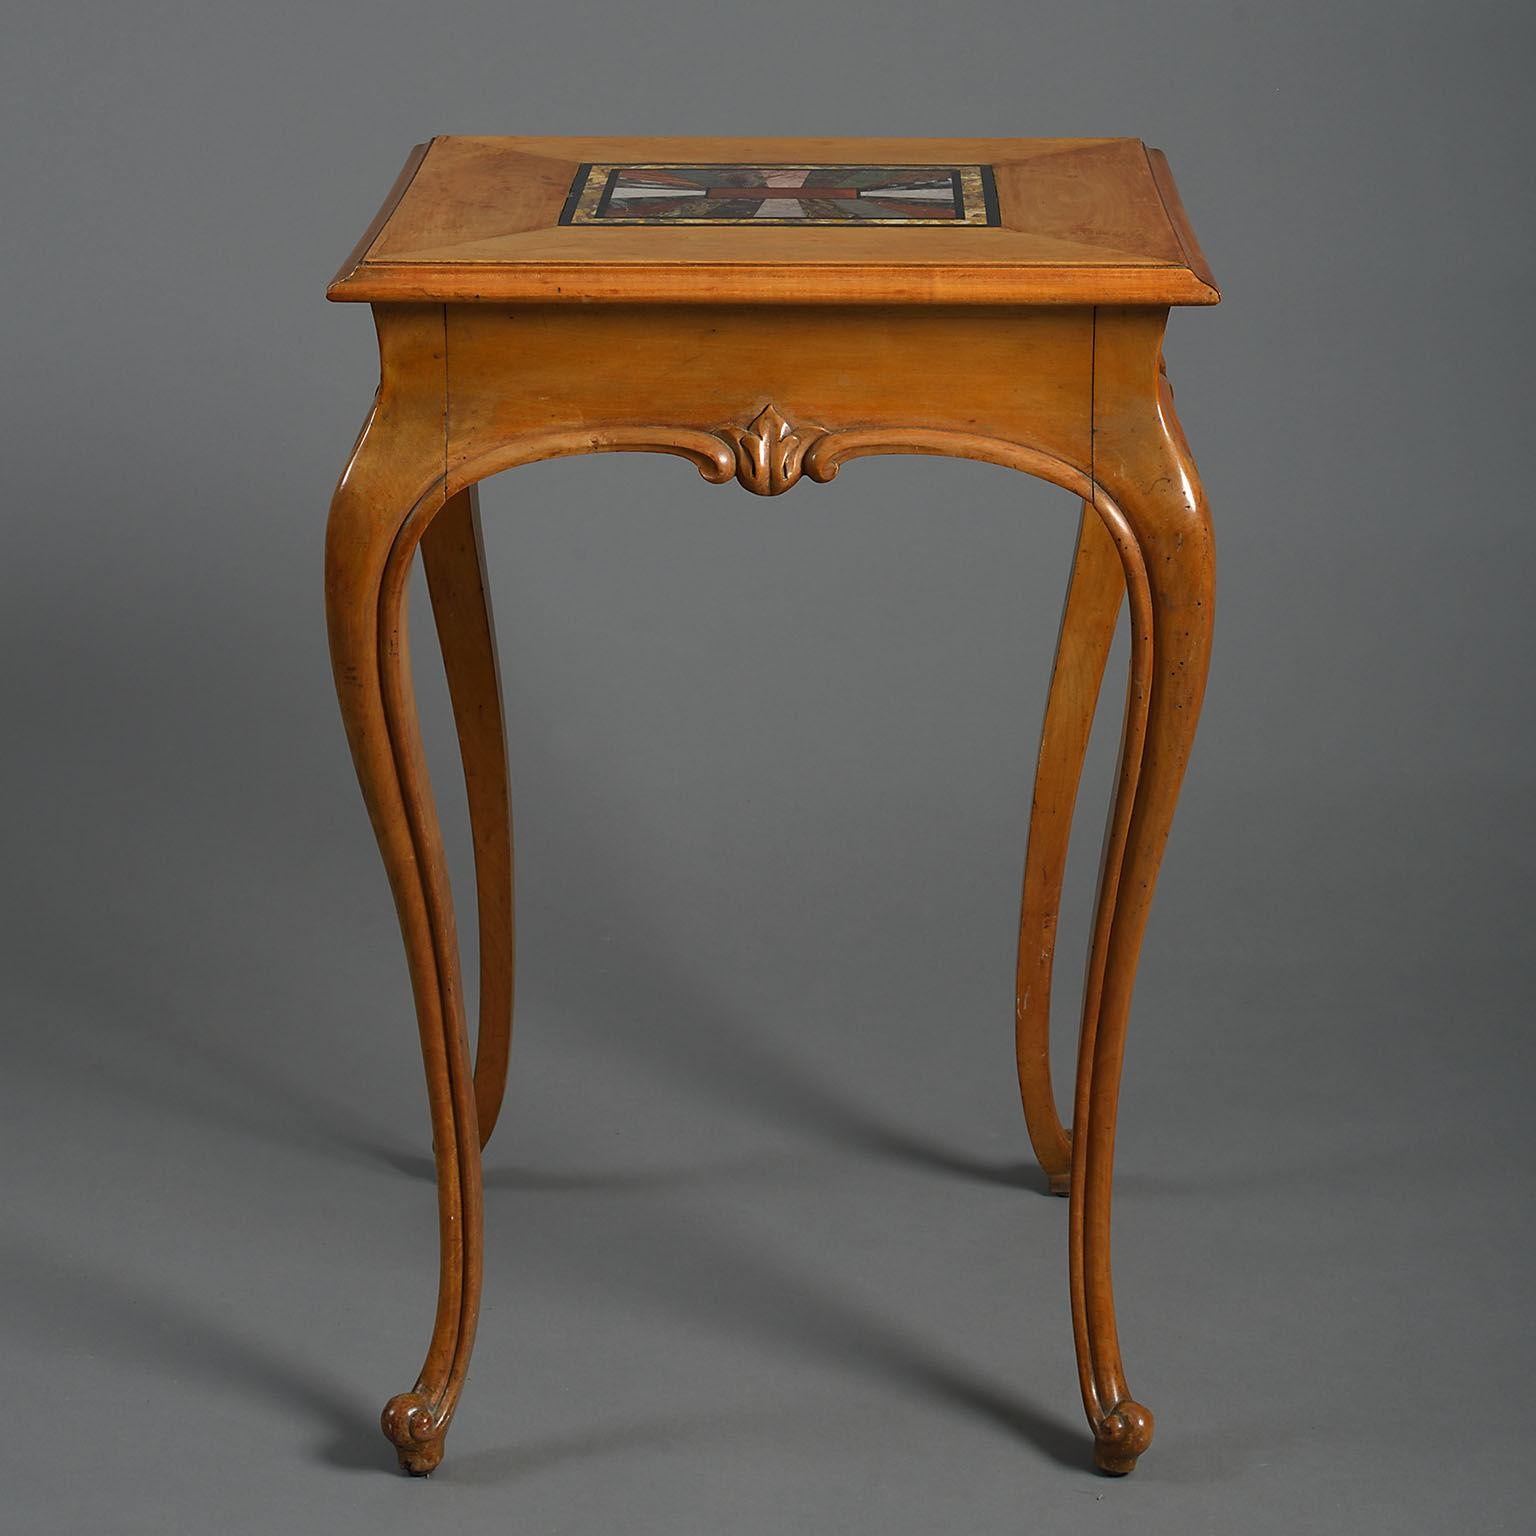 The rectangular top inset with a pietra-dura panel of specimen marbles bordered with maple-wood and raised on carved cabriole leg.